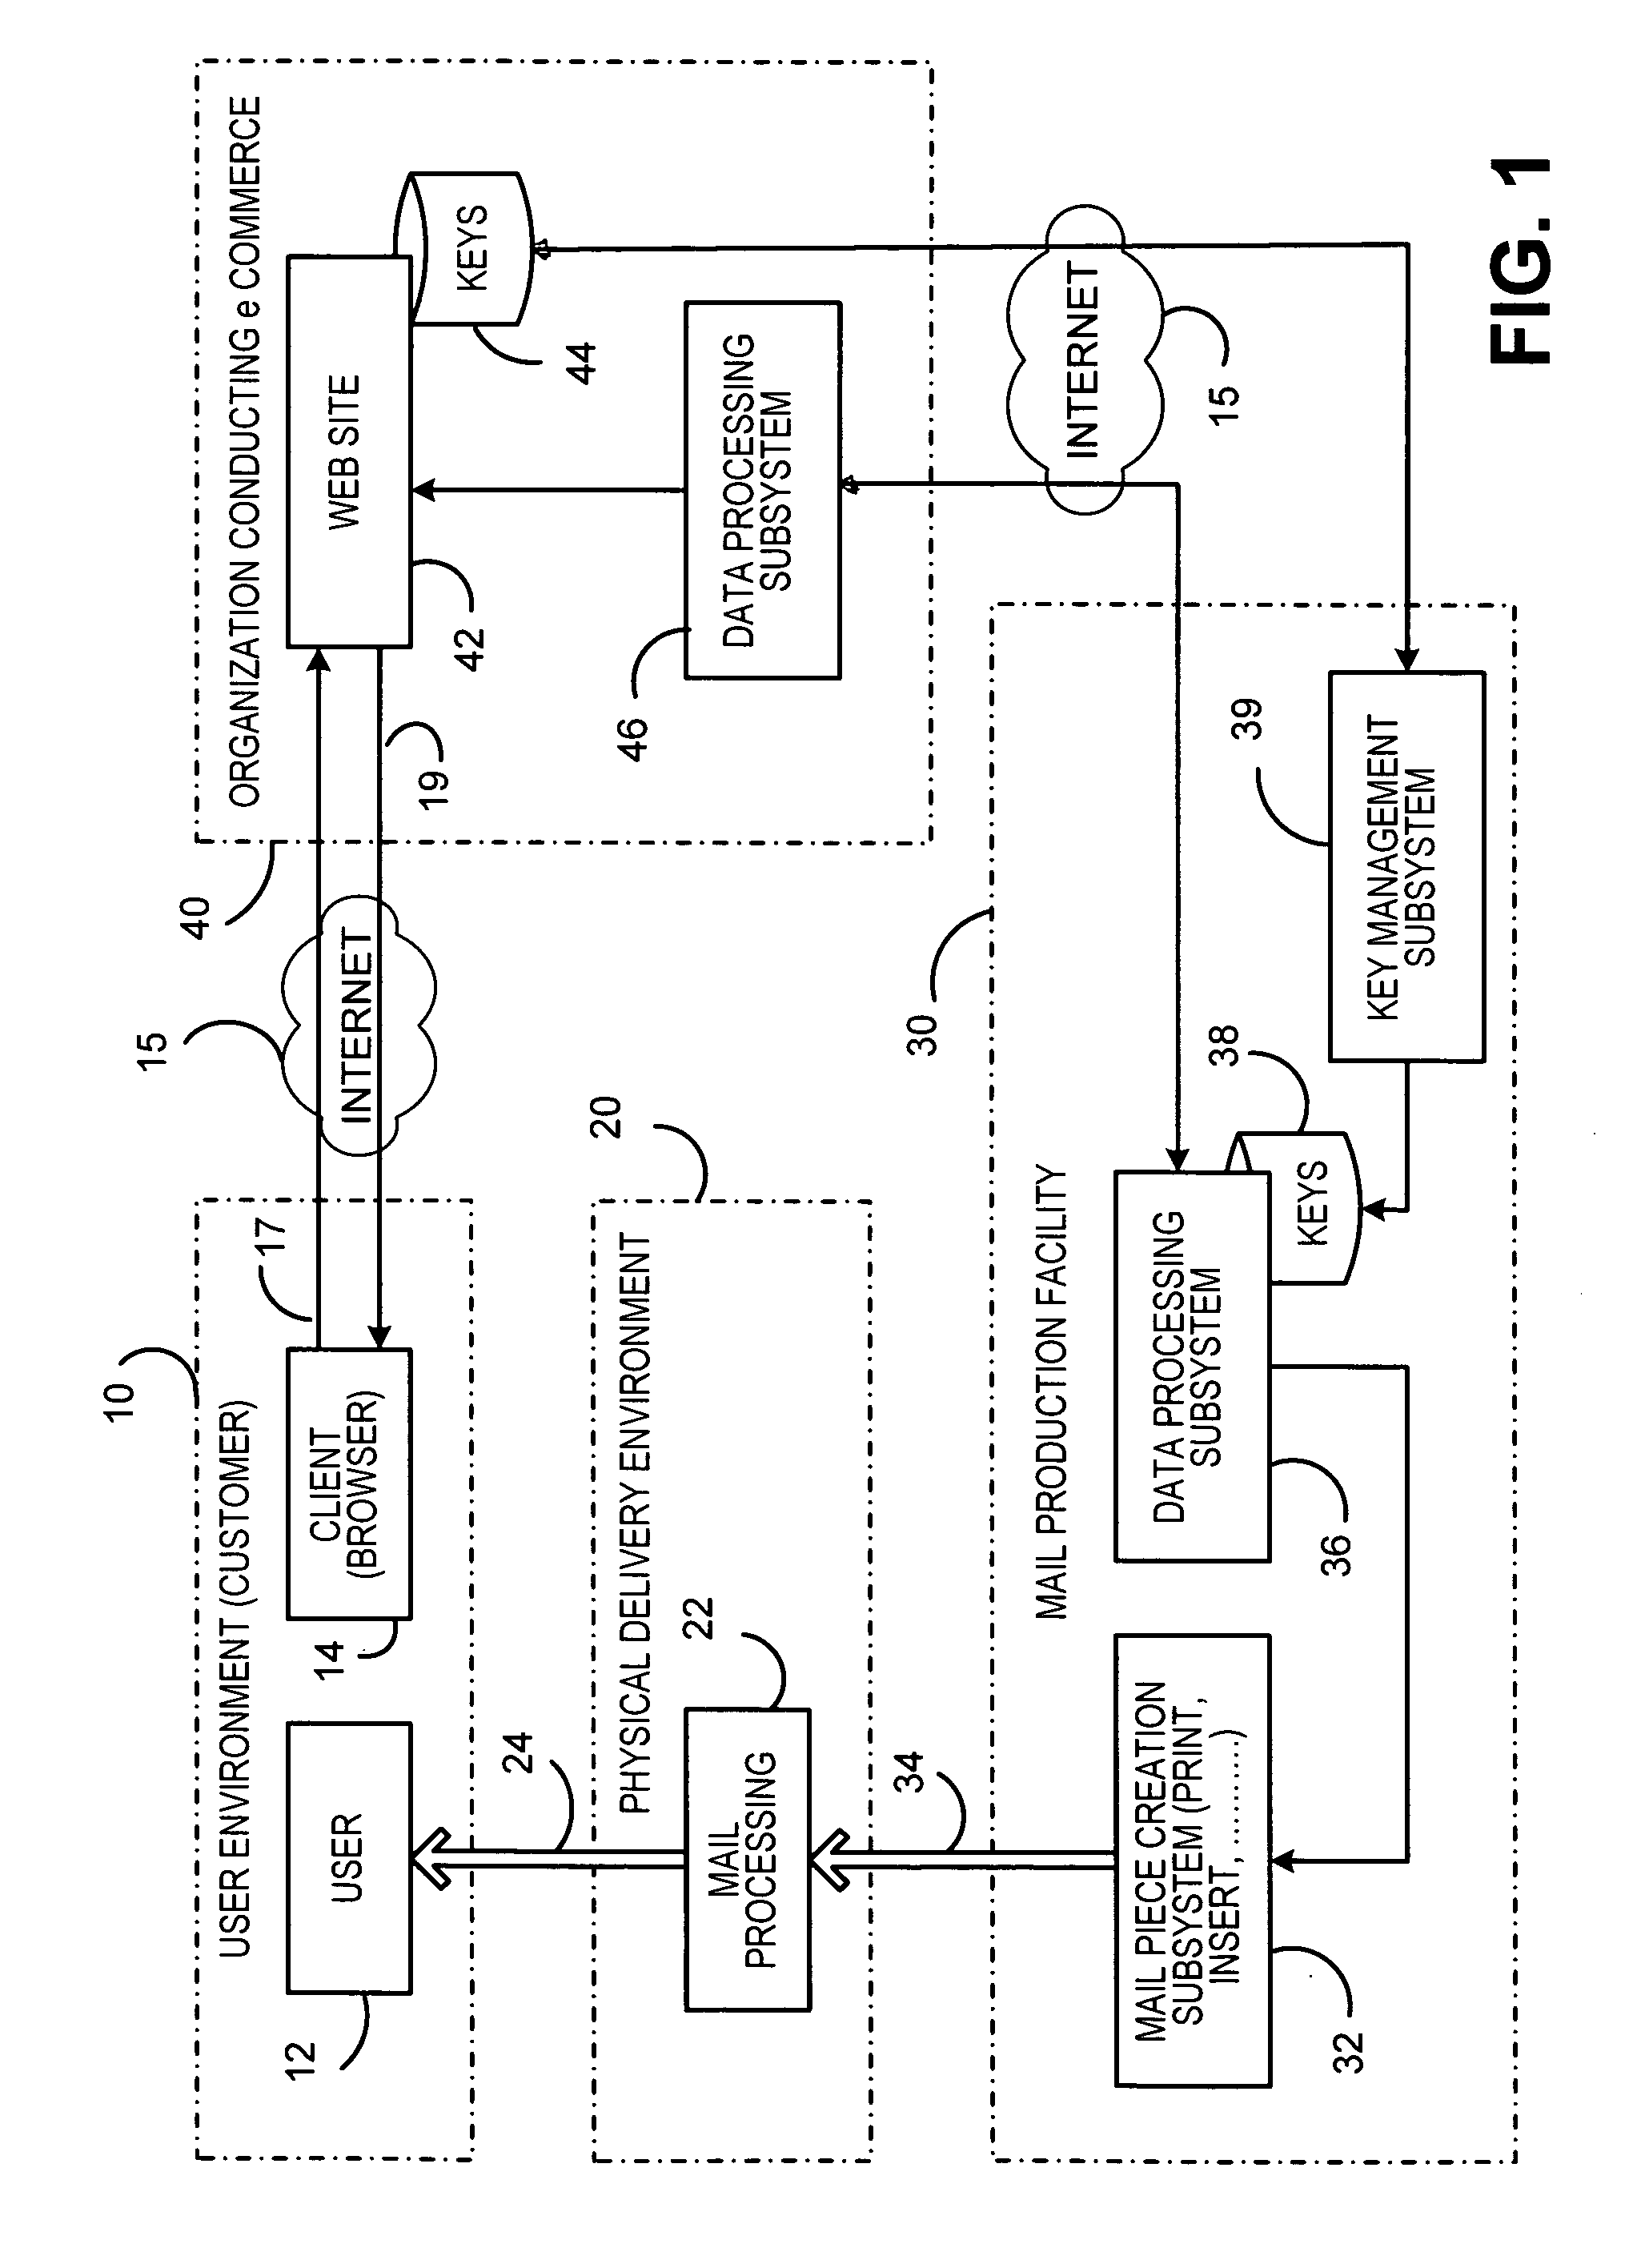 Enhanced network server authentication using a physical out-of-band channel